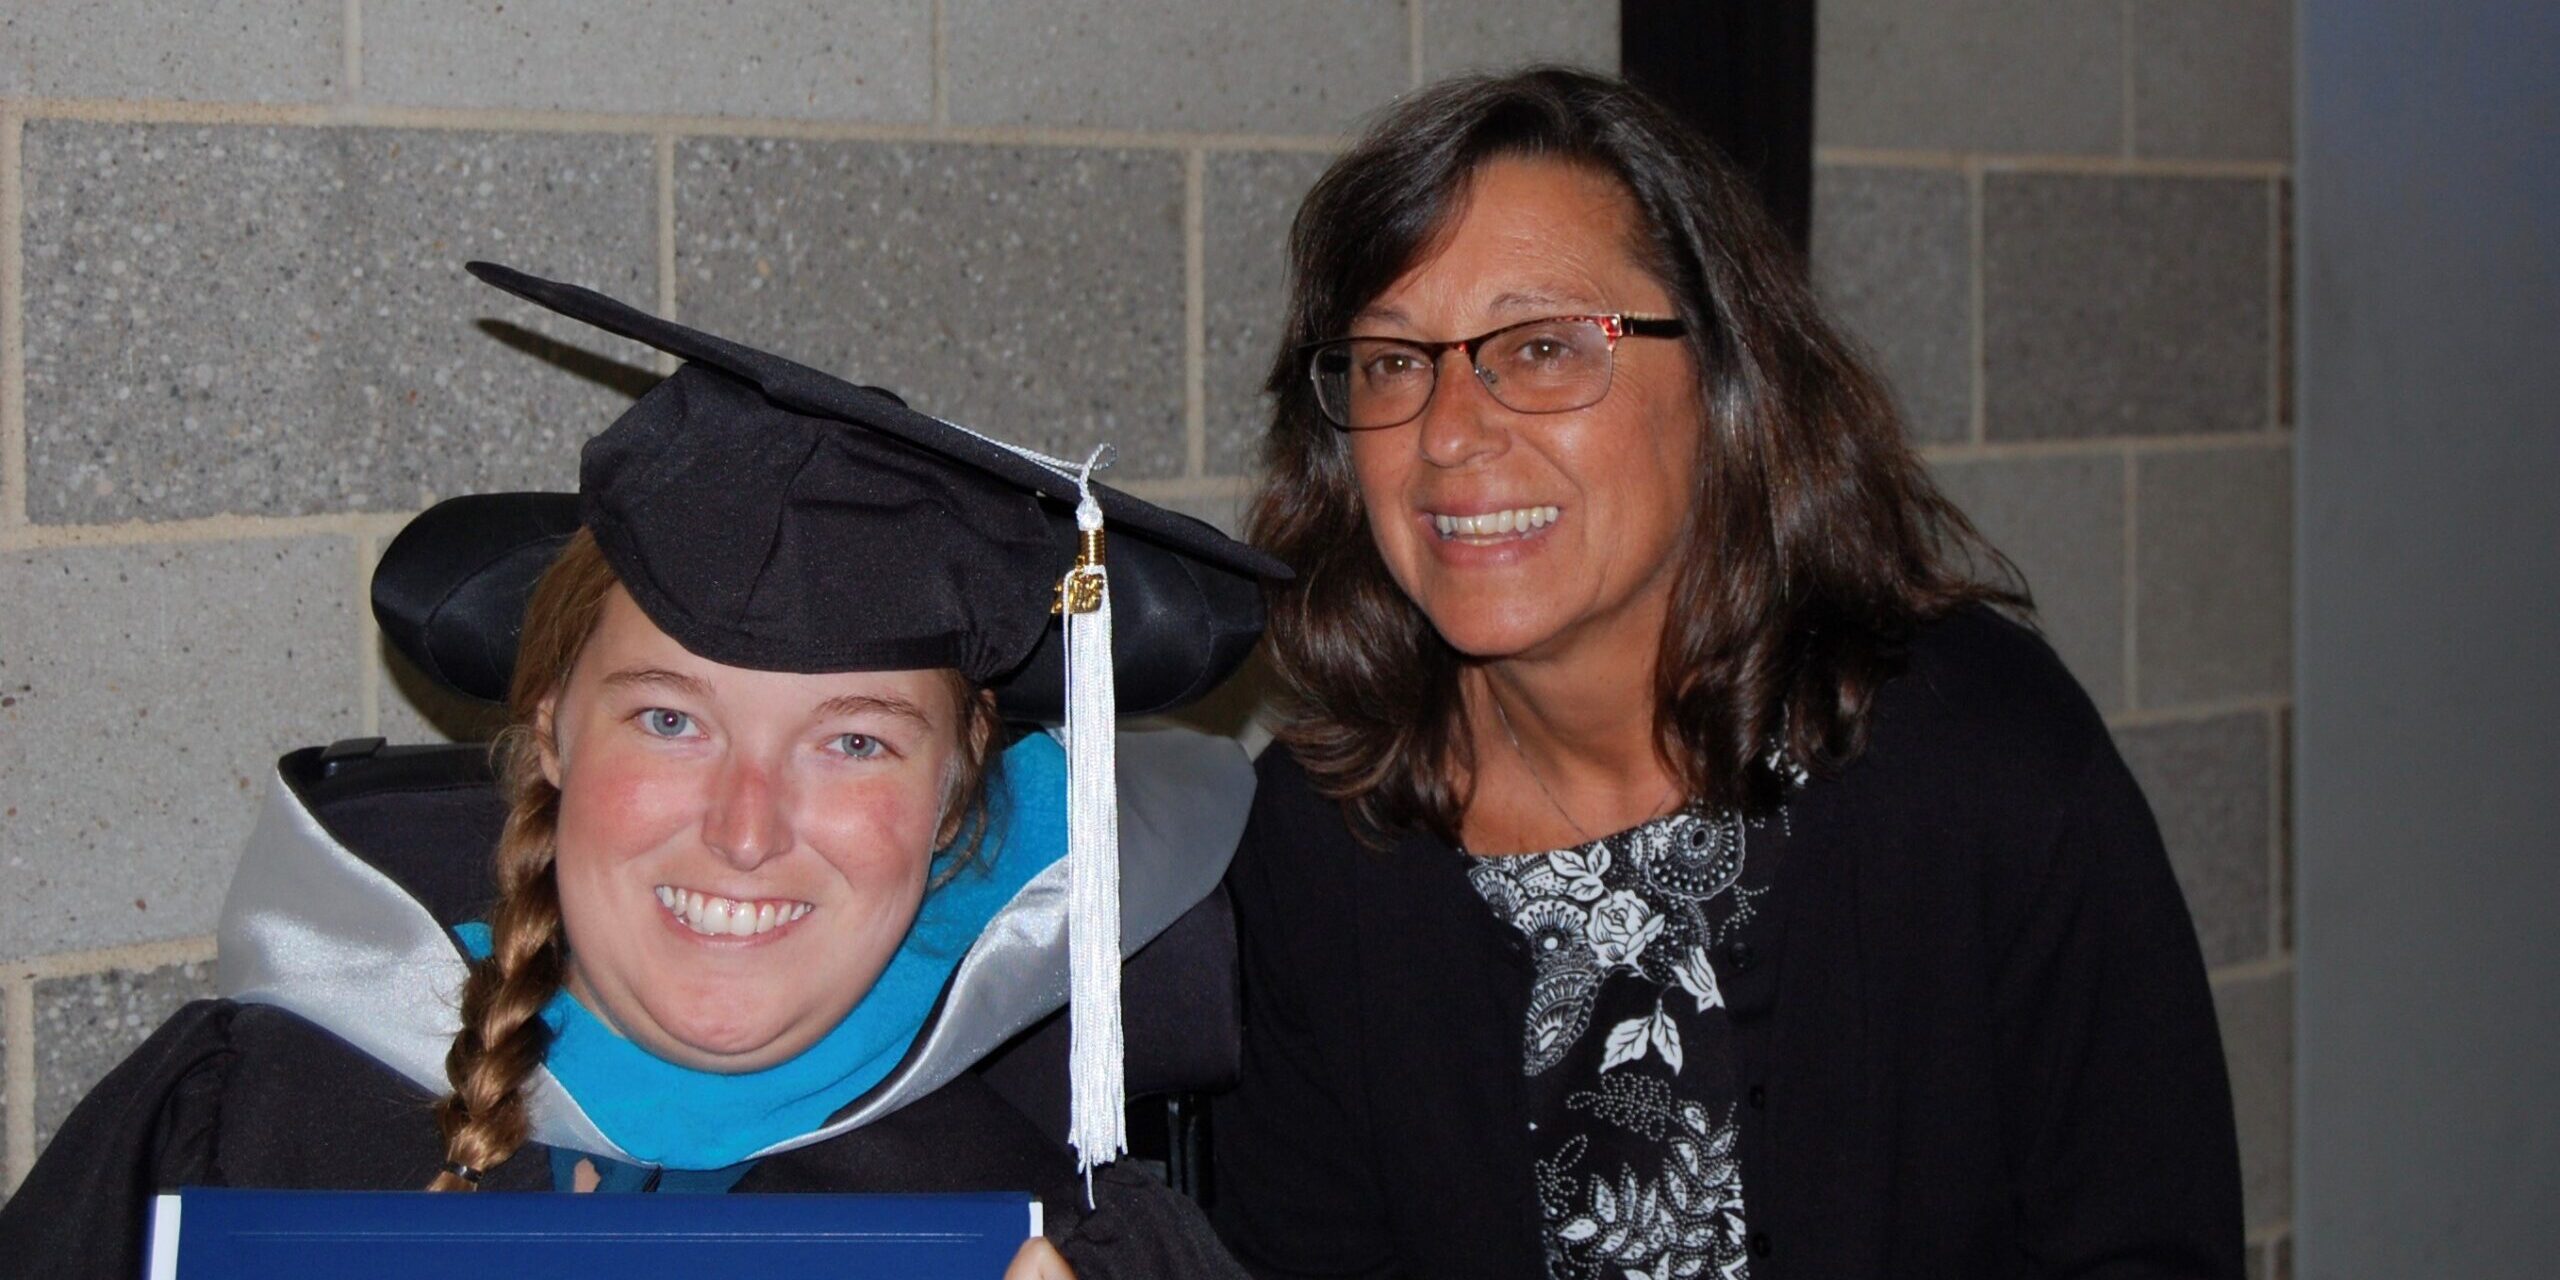 A young woman in a wheelchair wears a graduation cap and gown while holding a diploma and her mother smiles next to her